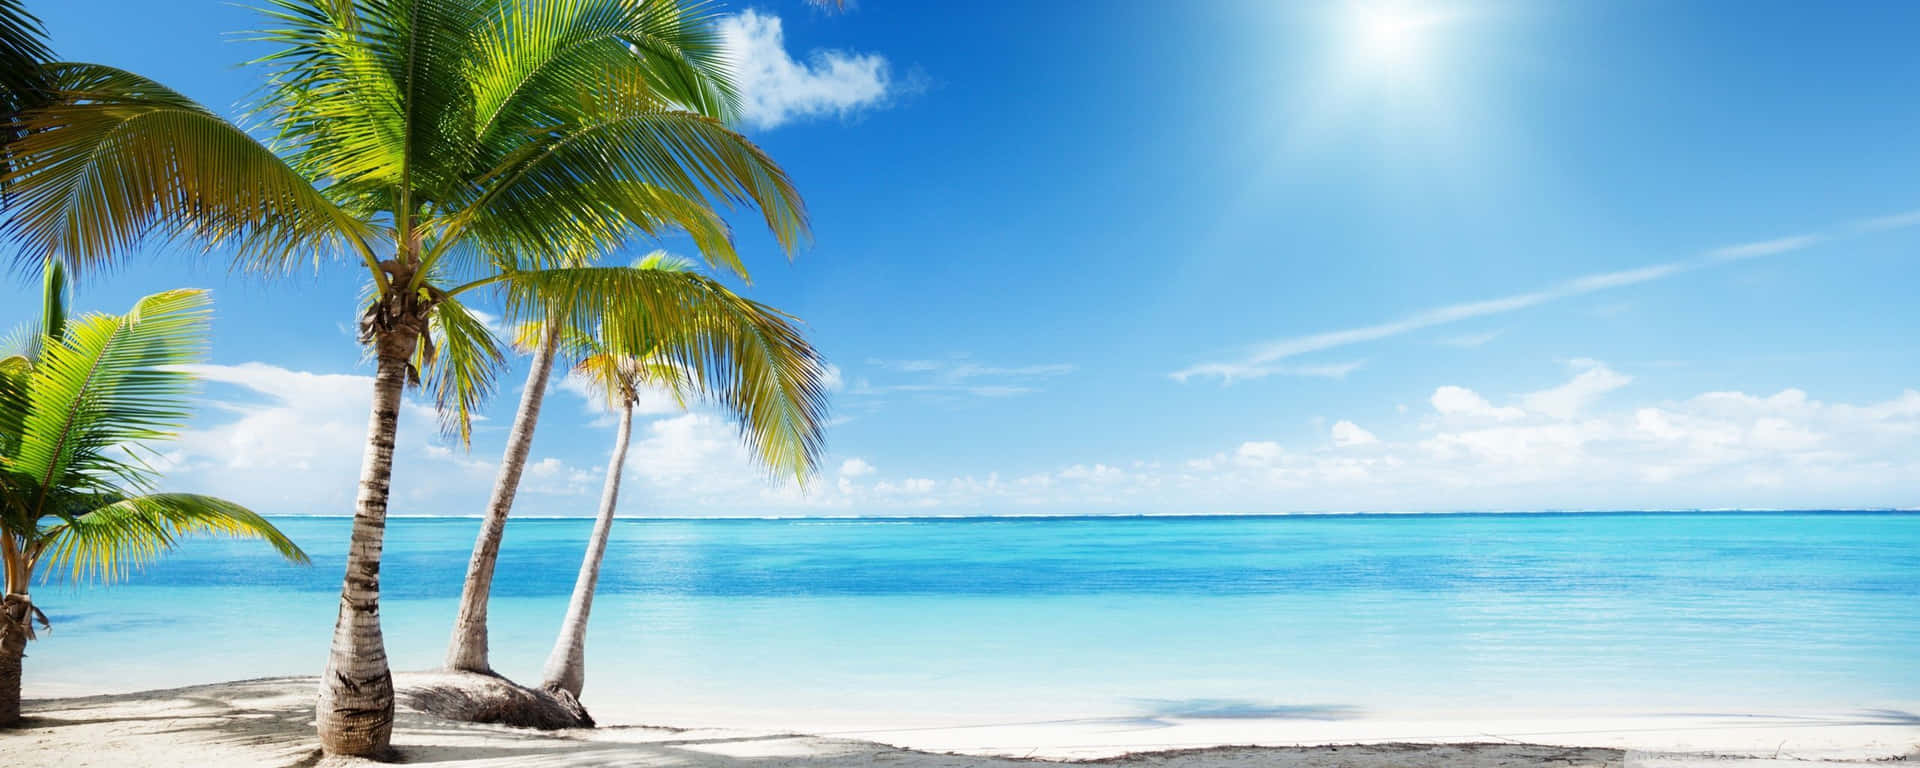 Soak Up the Sun from Home with a Beach Dual Monitor Wallpaper